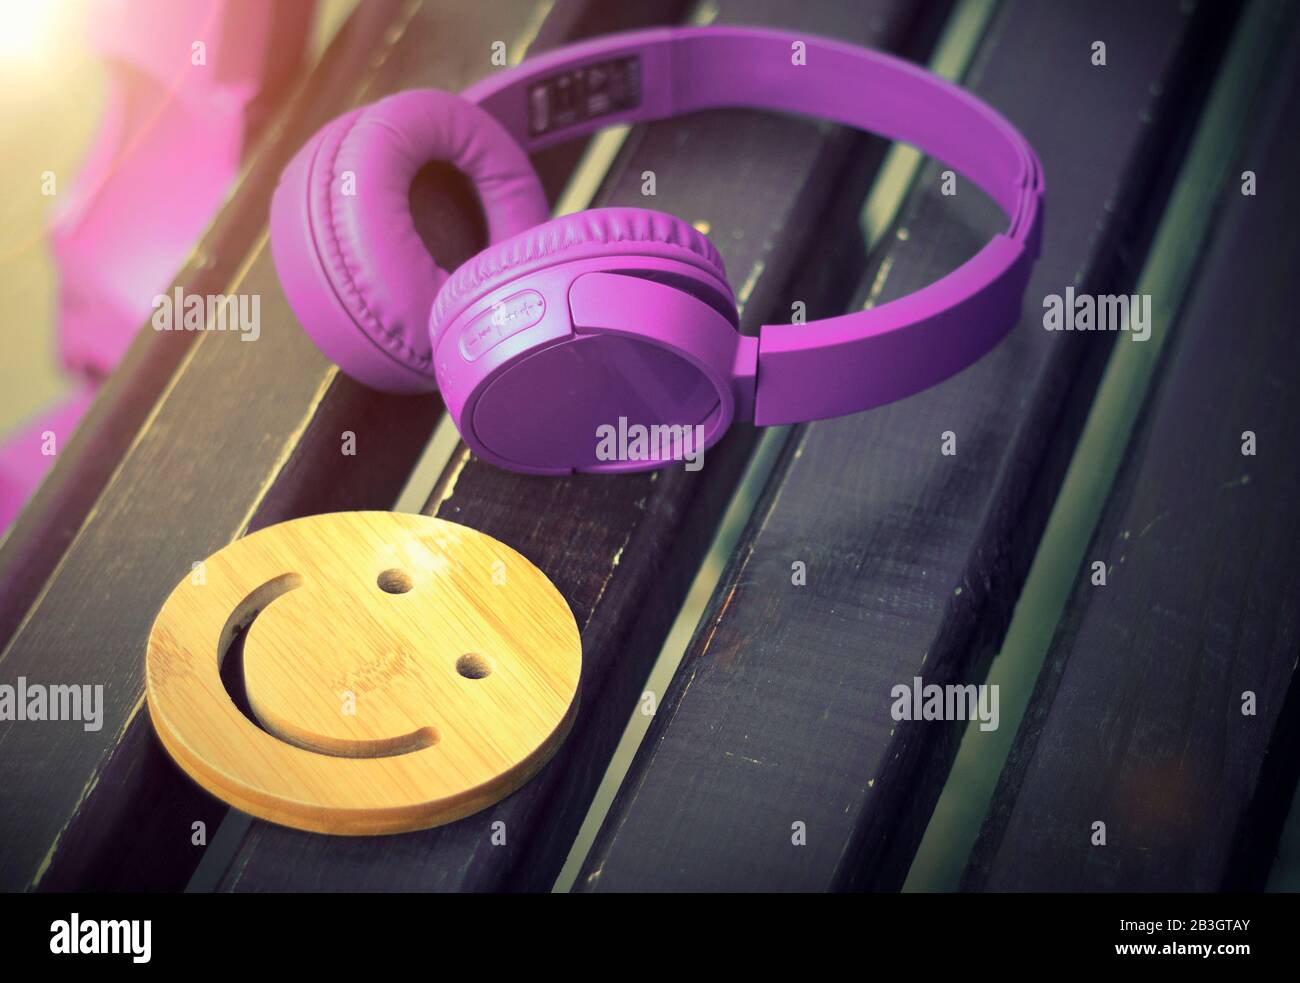 Fine music for perfect mood. Wireless headphones of purple color lie on a dark wooden bench. A wooden smile. The concept of love for music. No body. Stock Photo